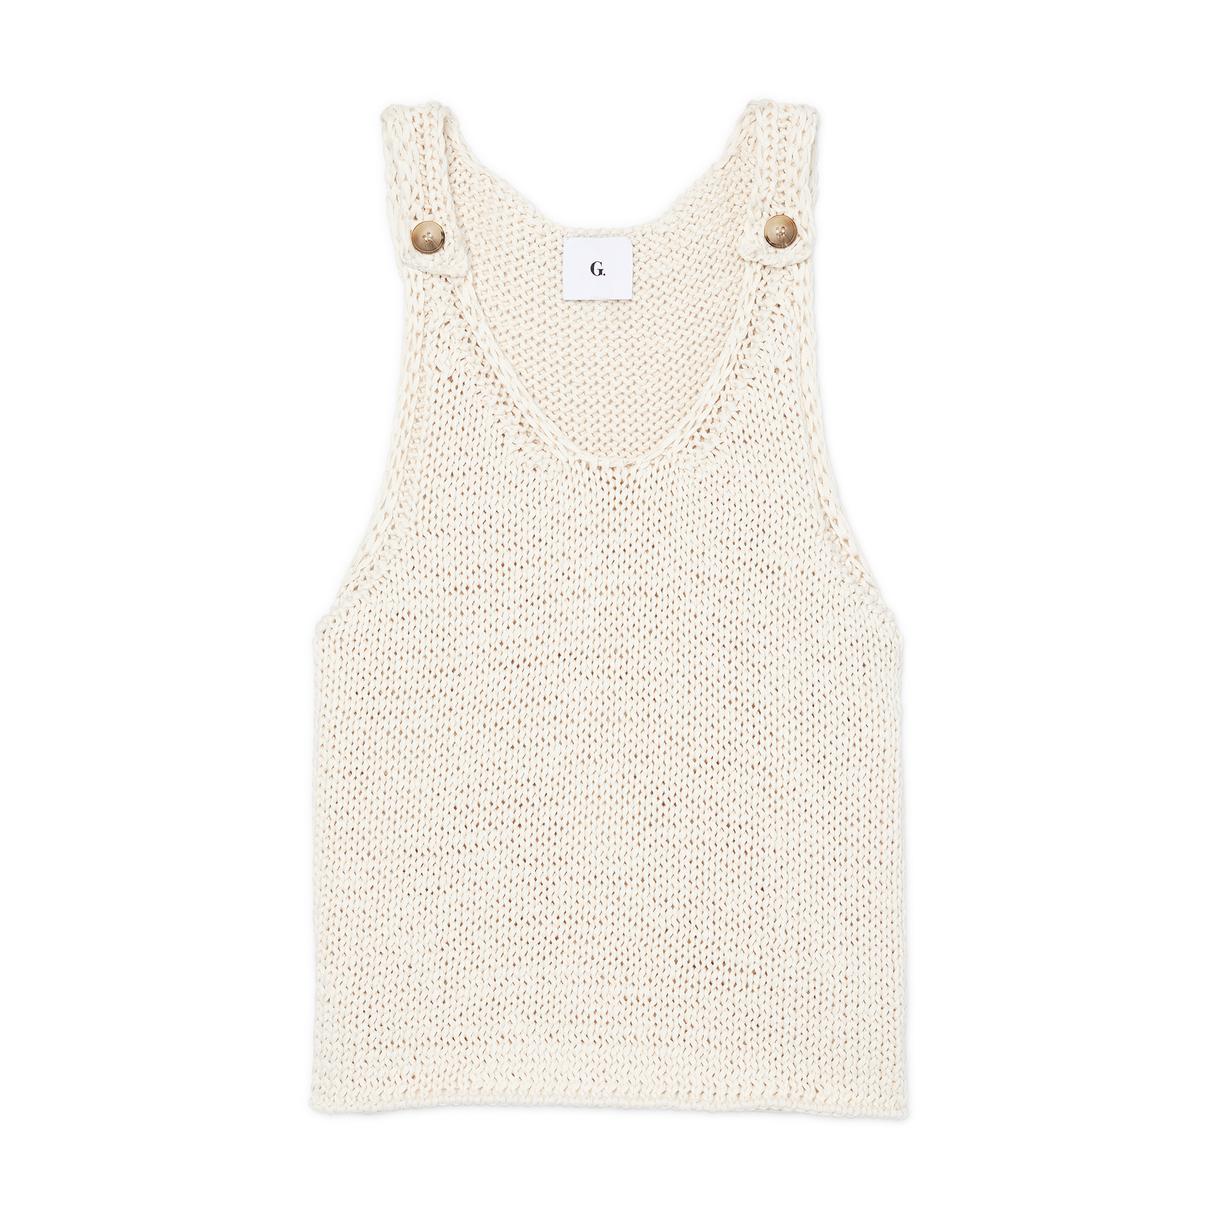 G. Label by goop Carrie Chunky Knit Top With Buttons | goop